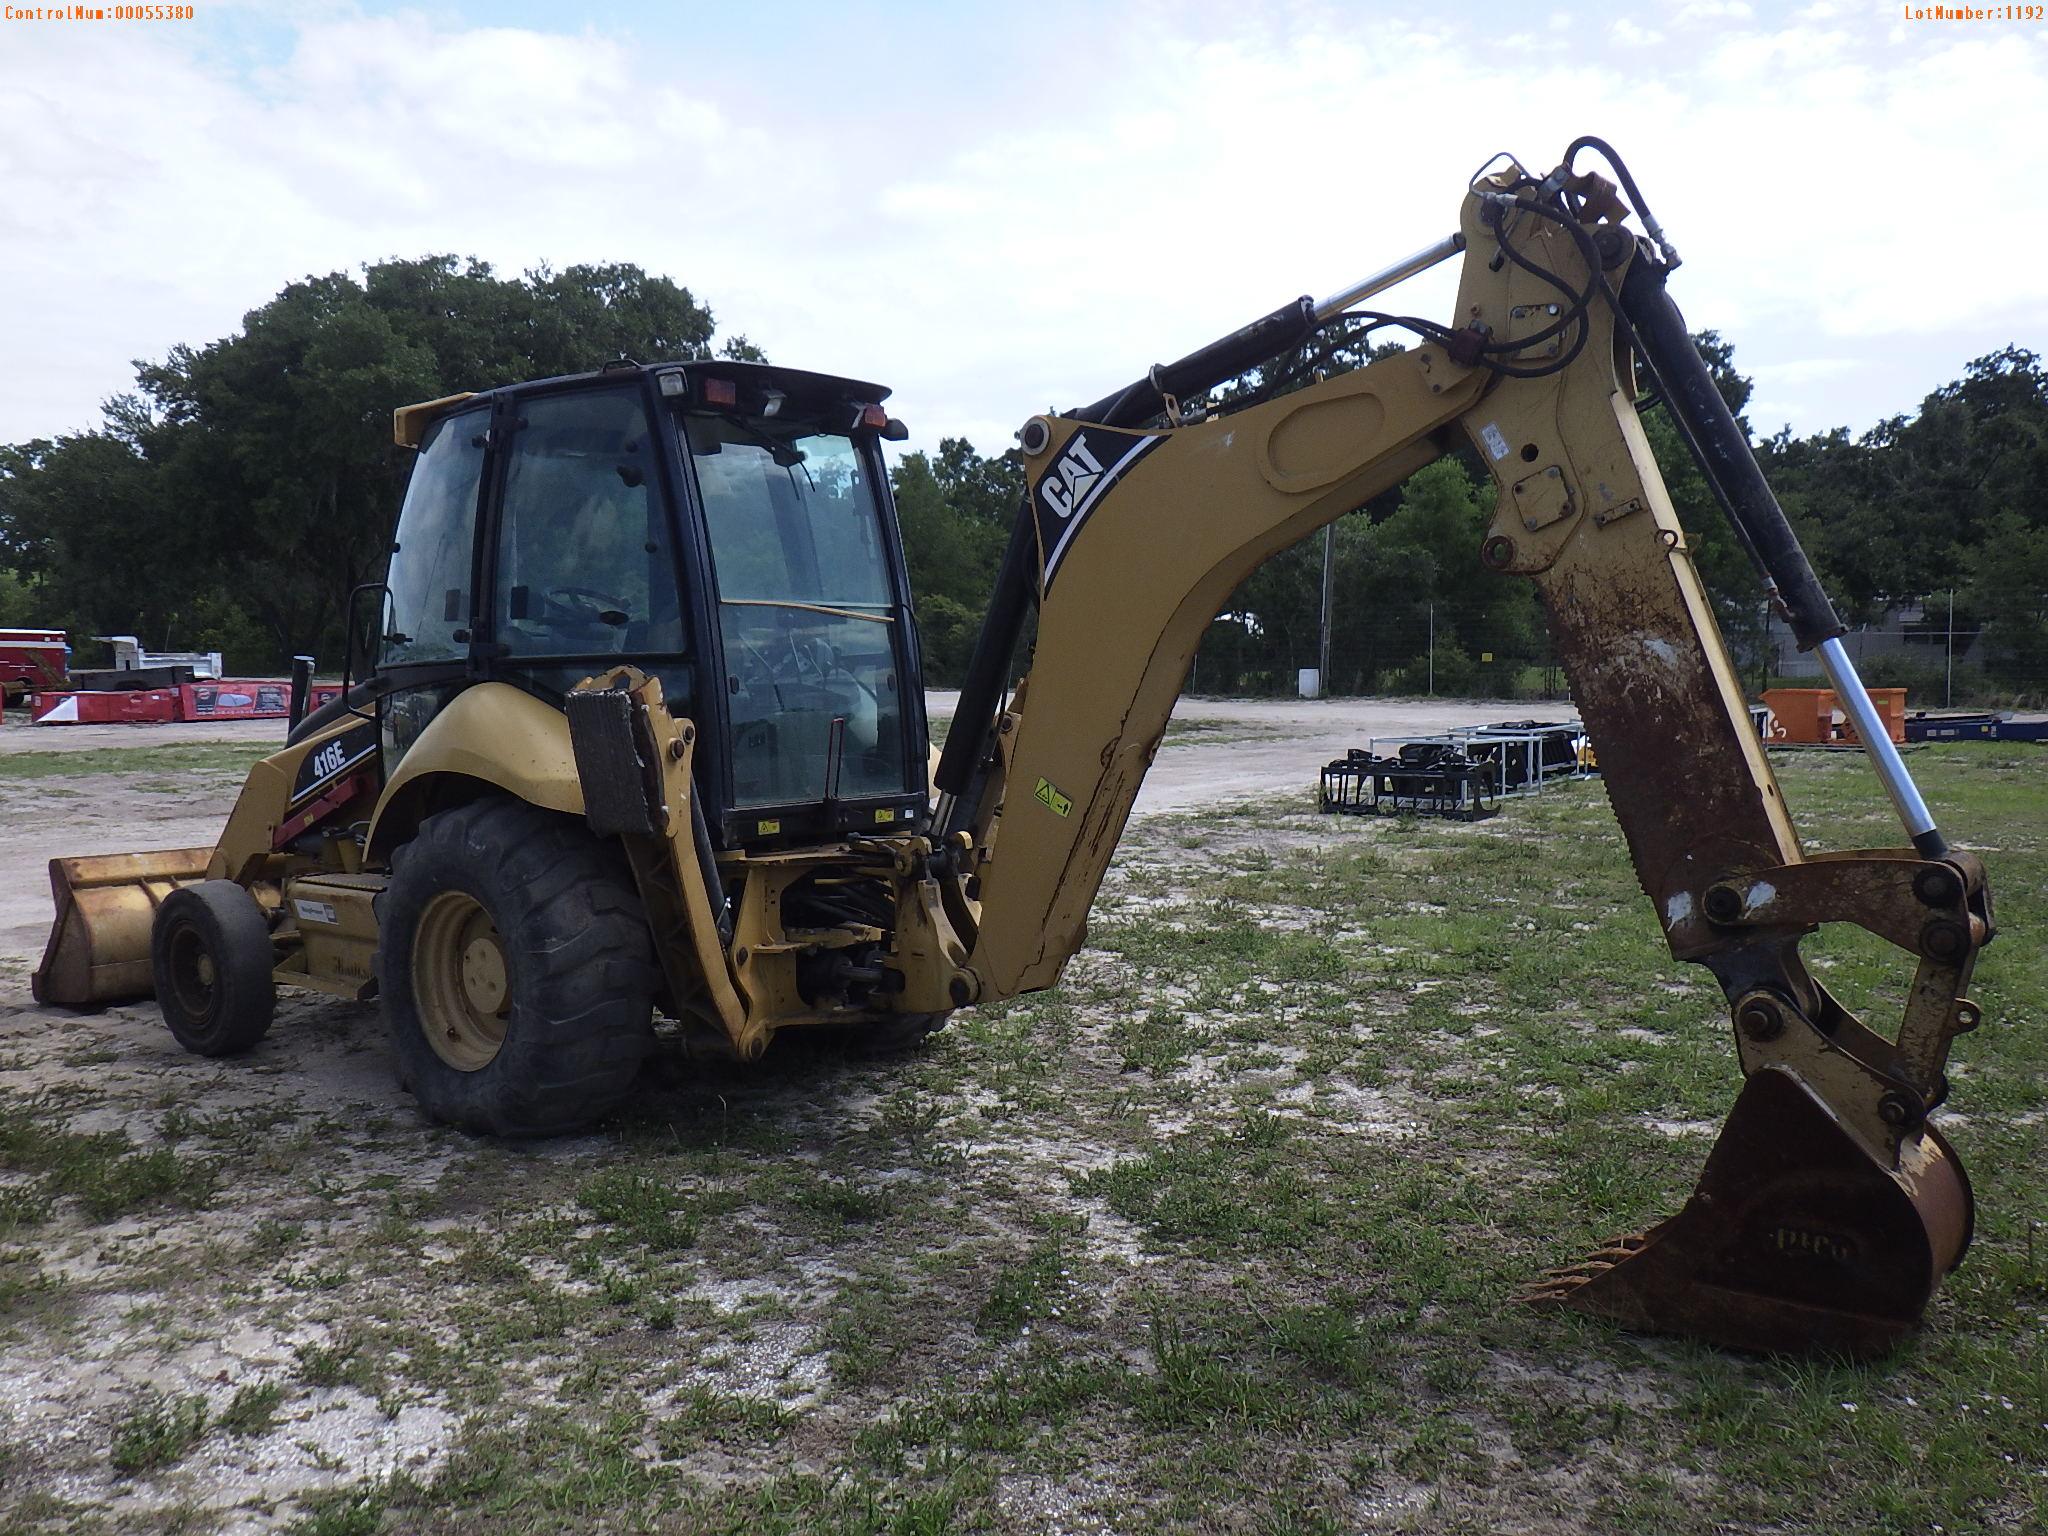 5-01192 (Equip.-Backhoe)  Seller: Gov-City Of Clearwater CAT 416E ENCLOSED CAB T